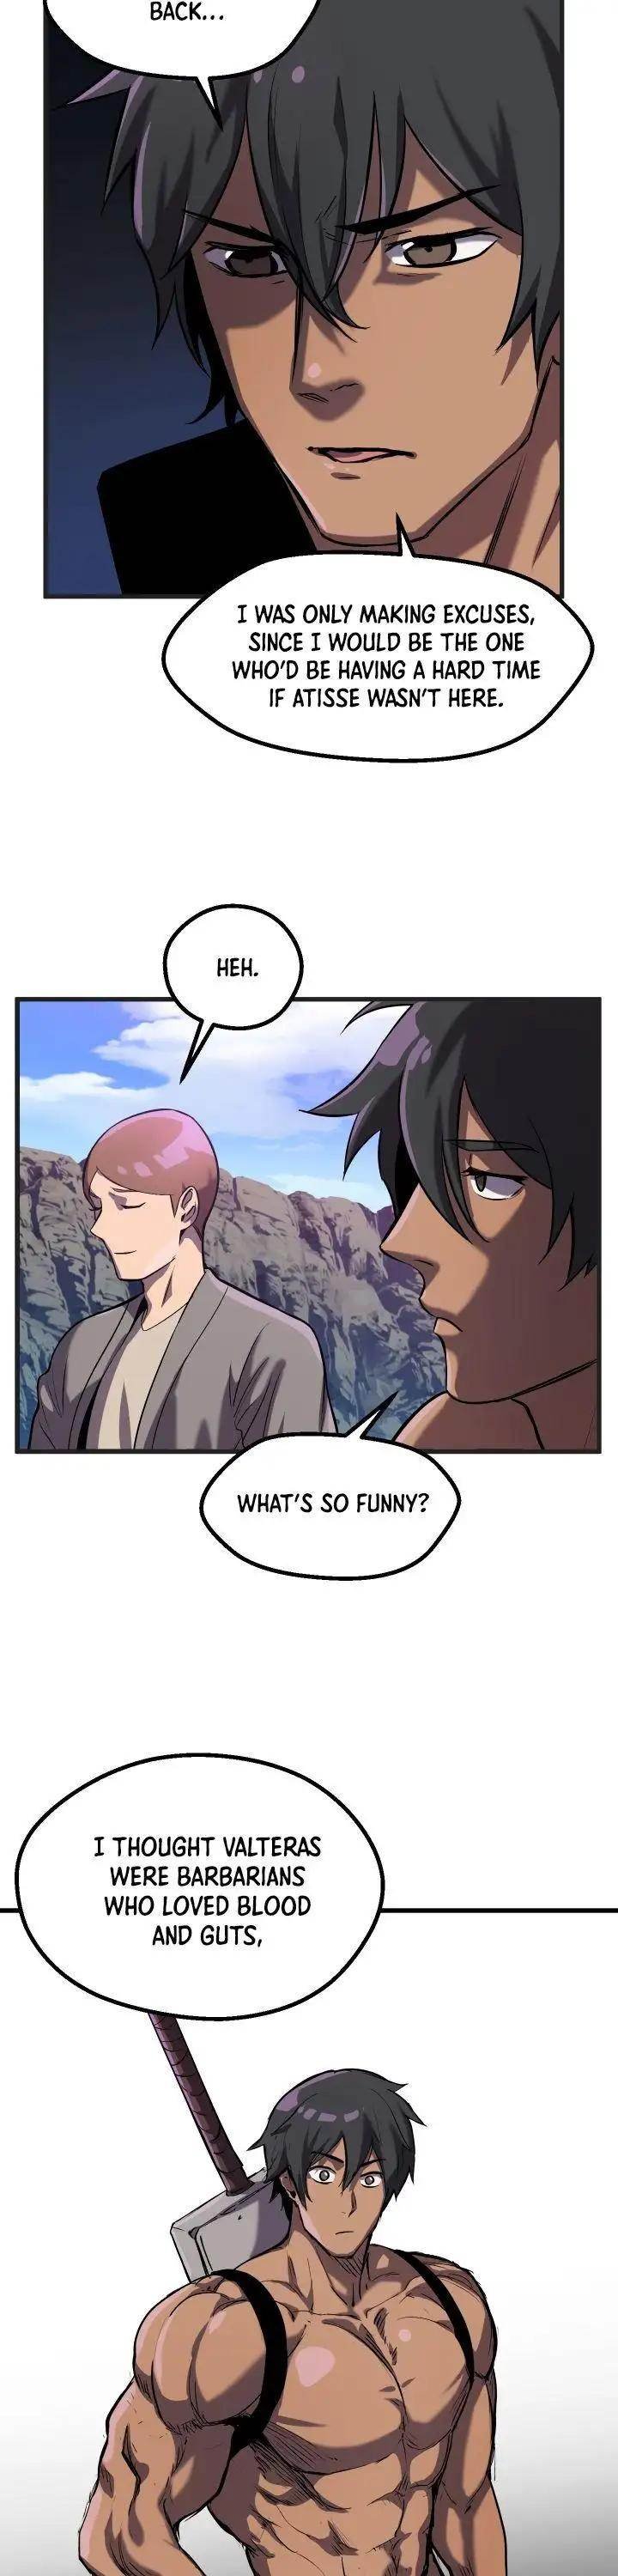 survival-story-of-a-sword-king-in-a-fantasy-world-chap-38-38